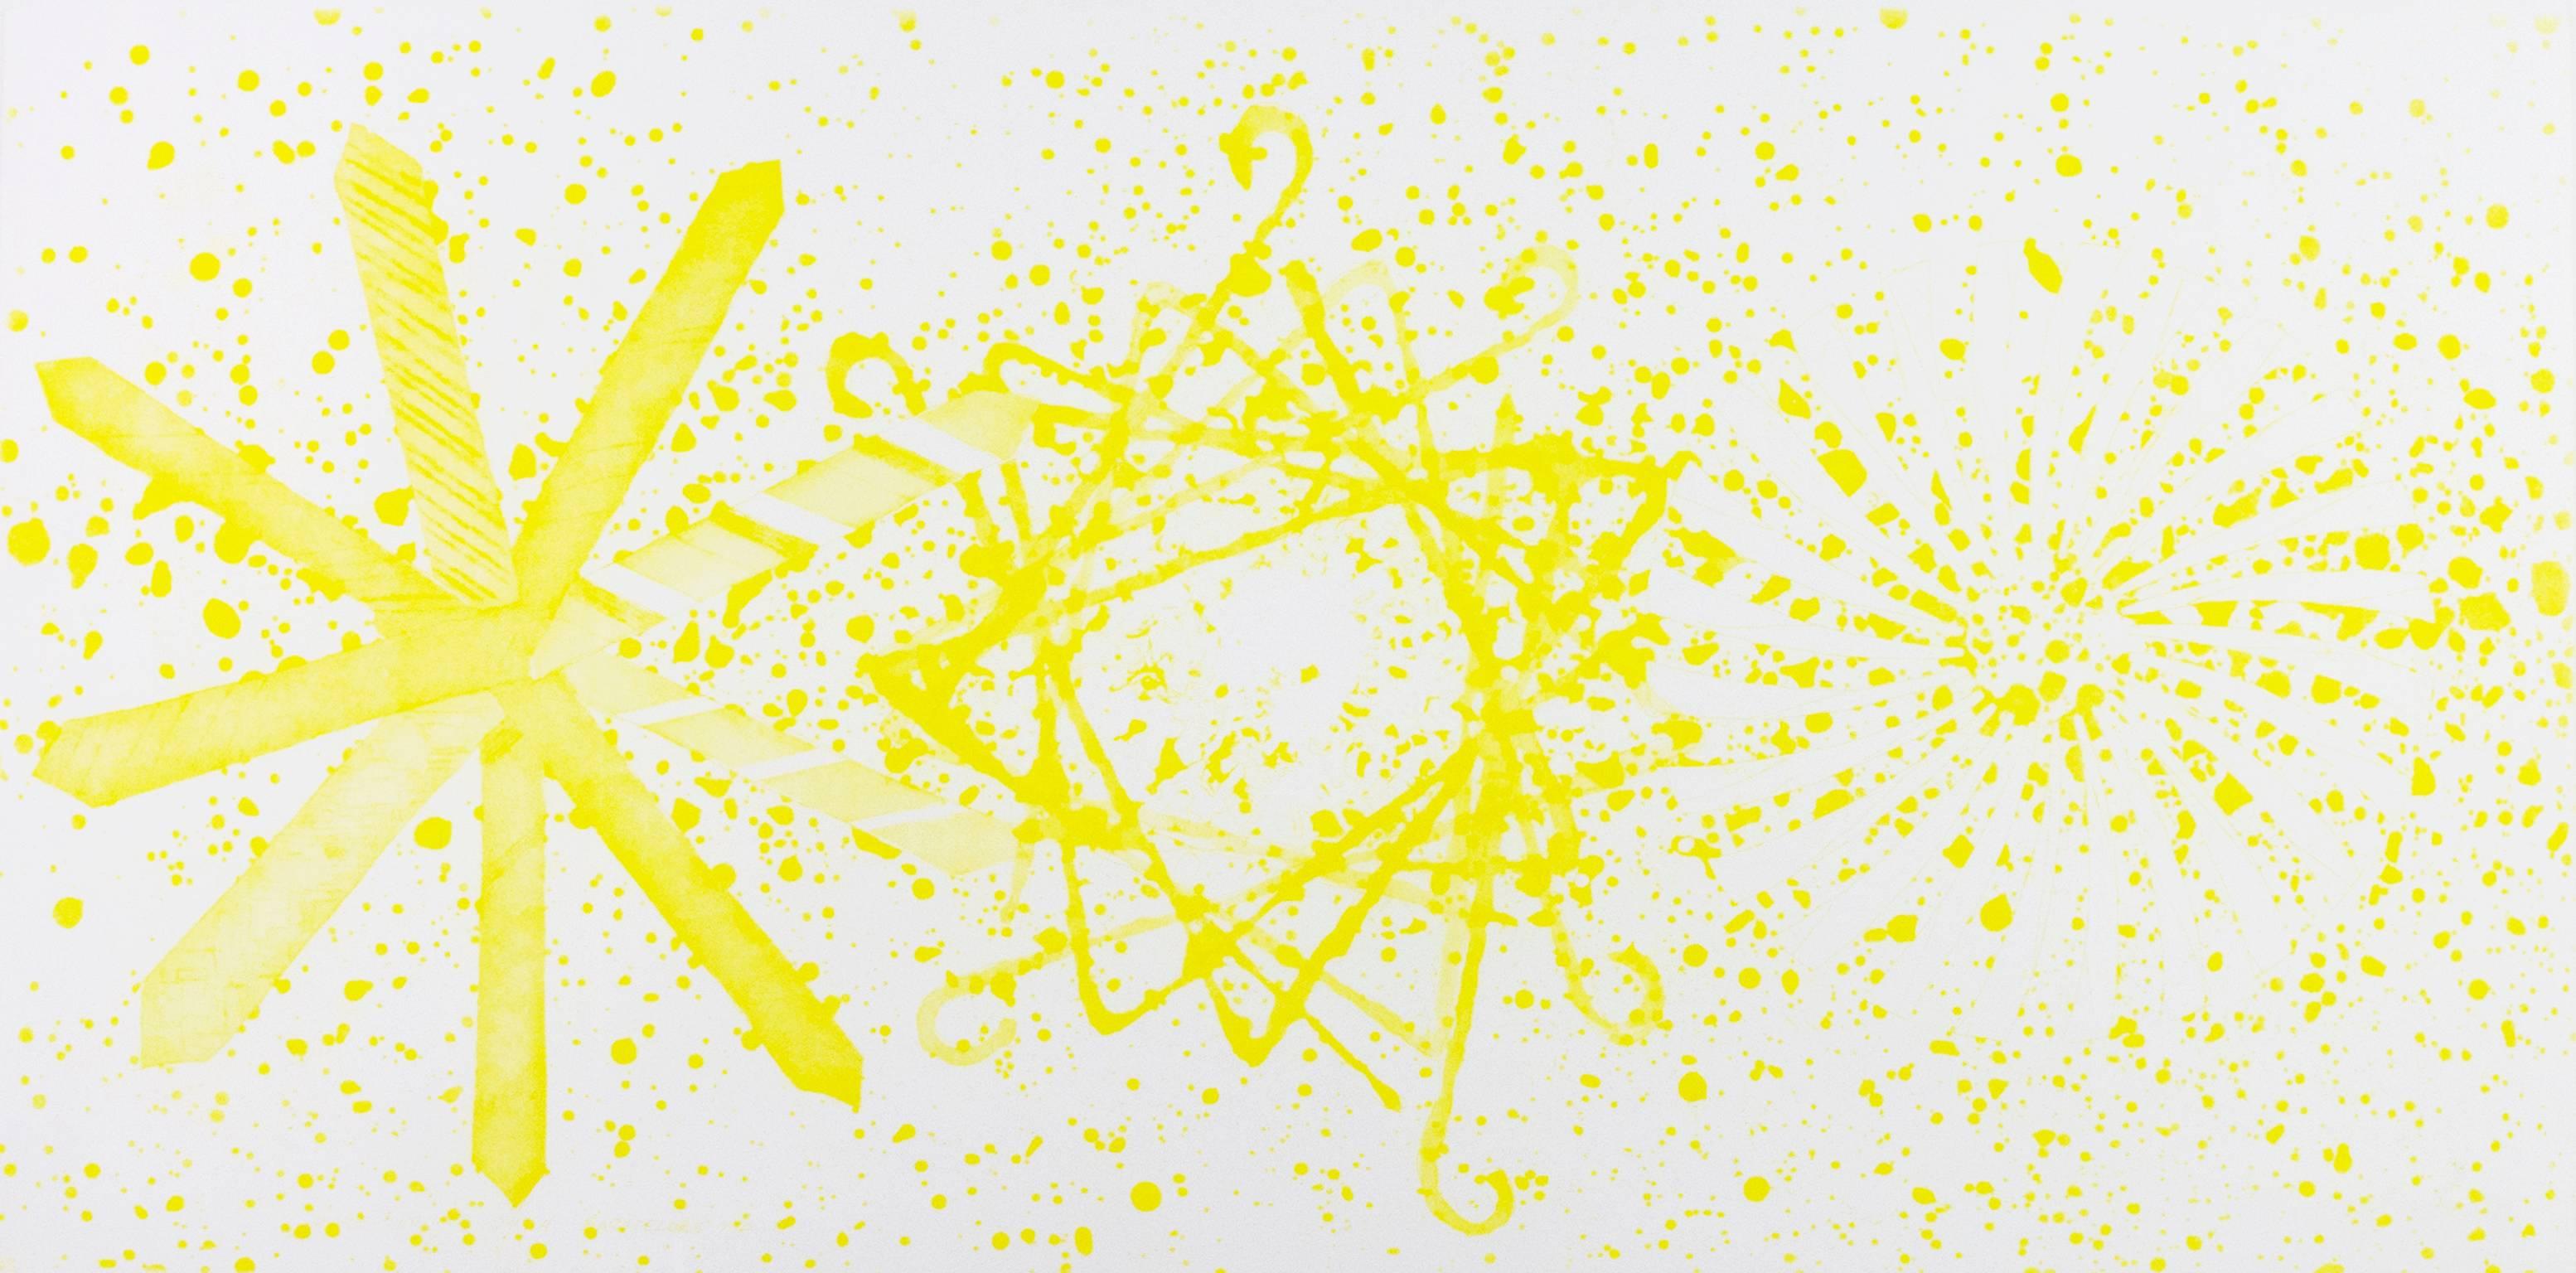 Second state in yellow etching of bright abstract stars, by American post-war pop artist James Rosenquist.
Signed and dated lower right
Titled and edition number 33/78 lower left

17 3/4" x 35 3/4" art
28 1/4" x 46 1/2" framed